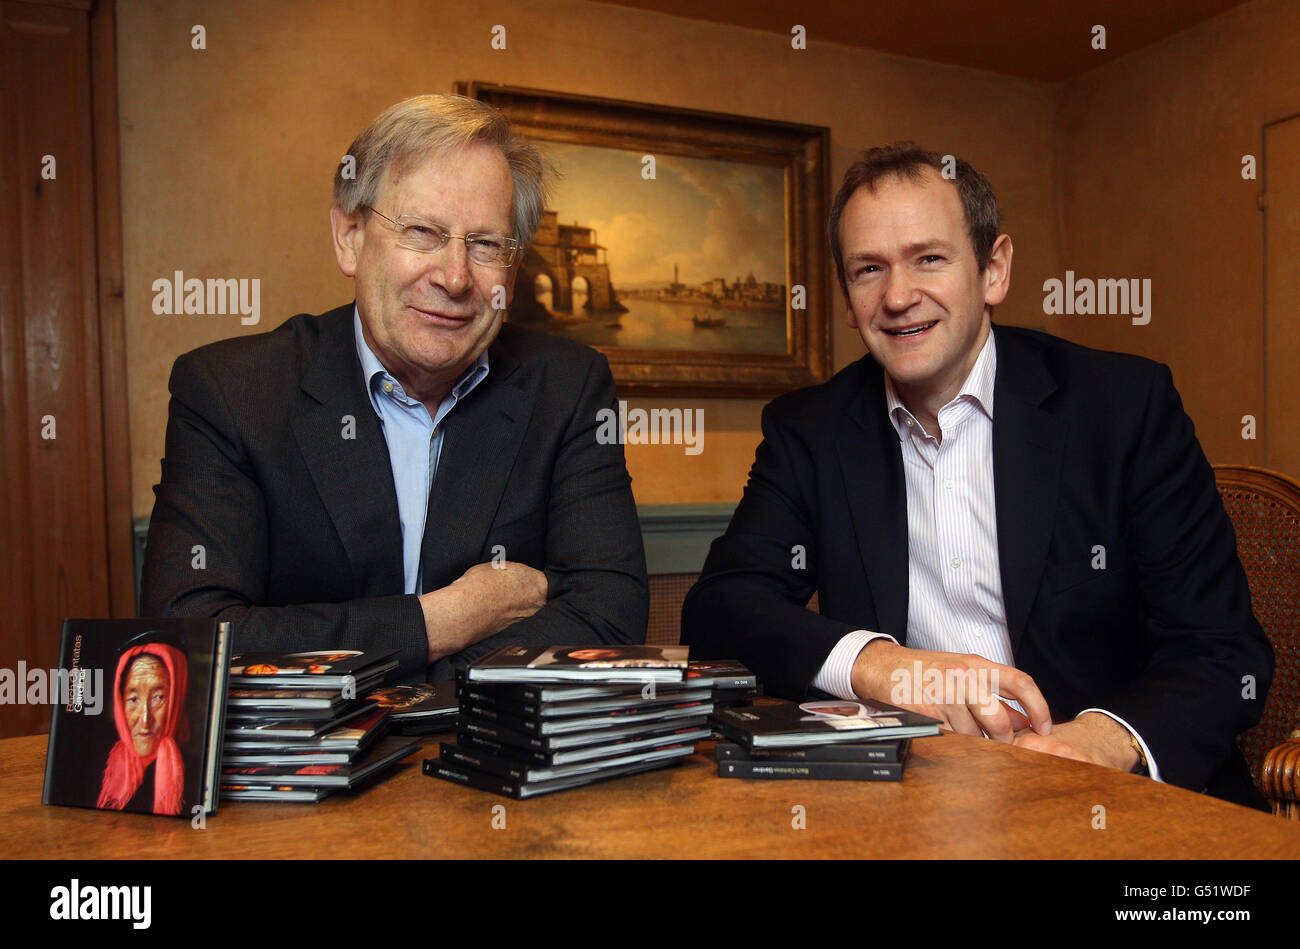 Alexander Armstrong (right) and Sir John Eliot Gardiner as the comedian and former Cambridge choral scholar is hoping to find 2,500 music lovers to donate £20 each in a bid to finally complete Gardiner's landmark musical pilgrimage to perform and record all of J.S. Bach's church cantatas. Stock Photo